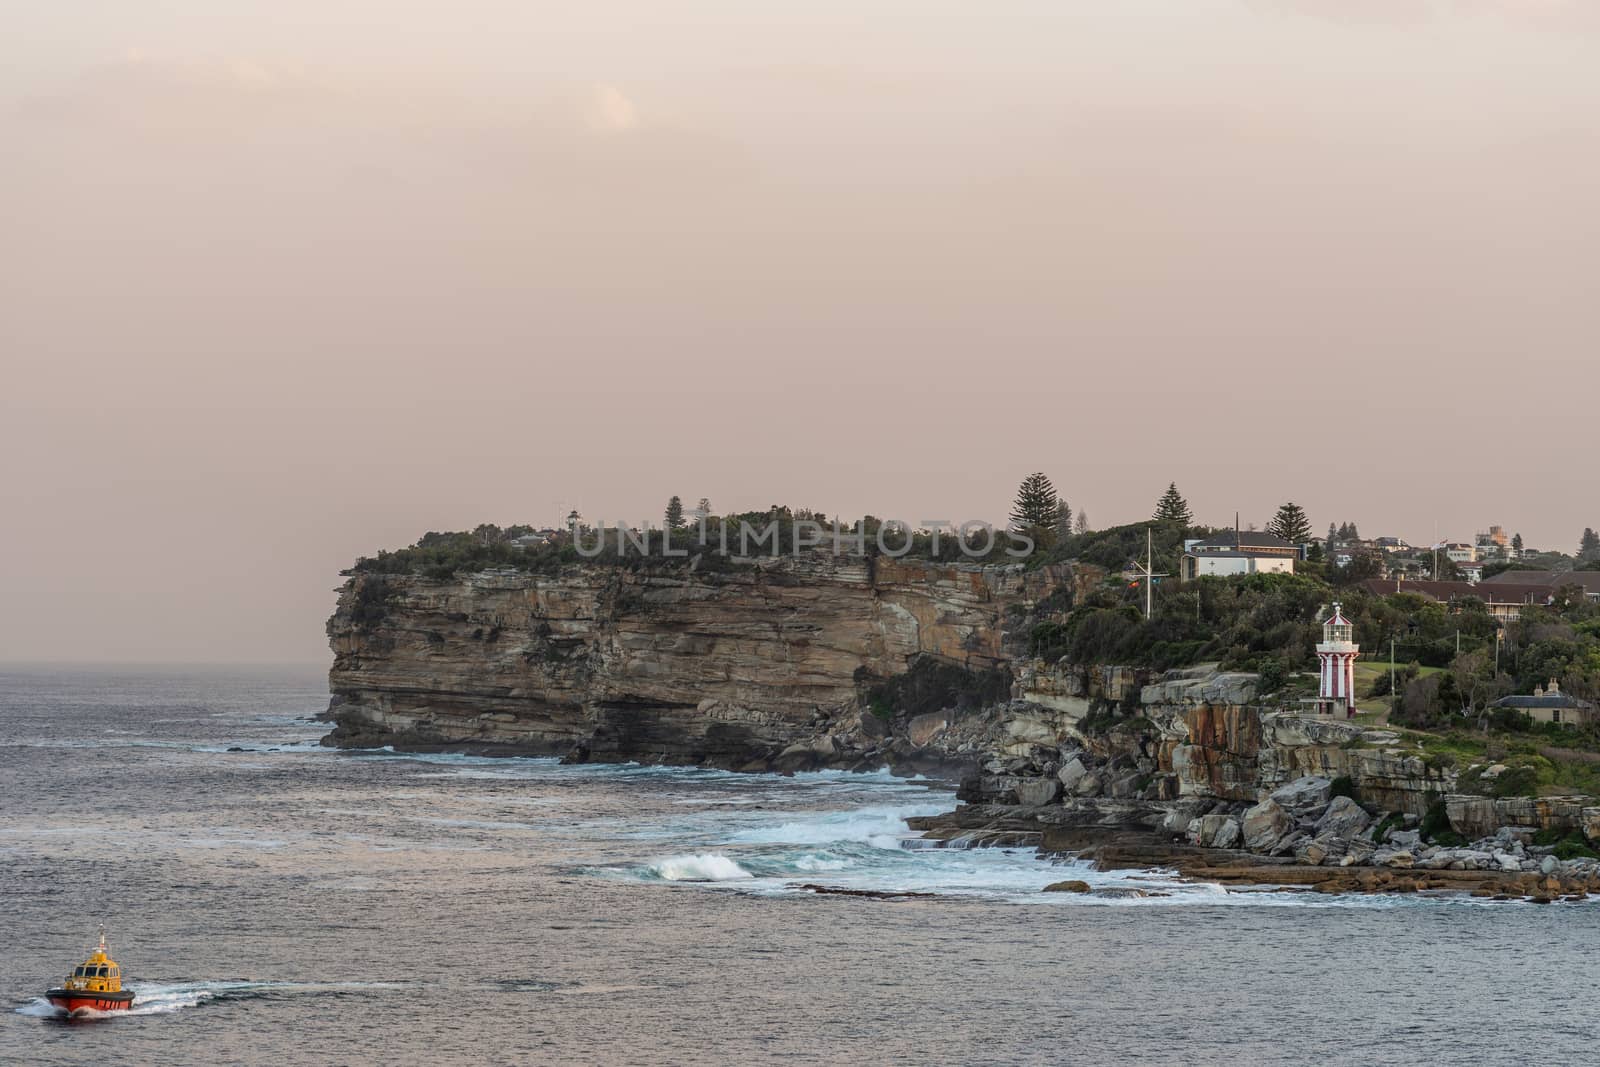 Sydney, Australia - February 12, 2019: South Head cliffs at gate between Tasman Sea and Sydney Bay during sunset. Cloudless pale sky. Gray water. Pilot boat. Crashing waves. Hornby lighthouse